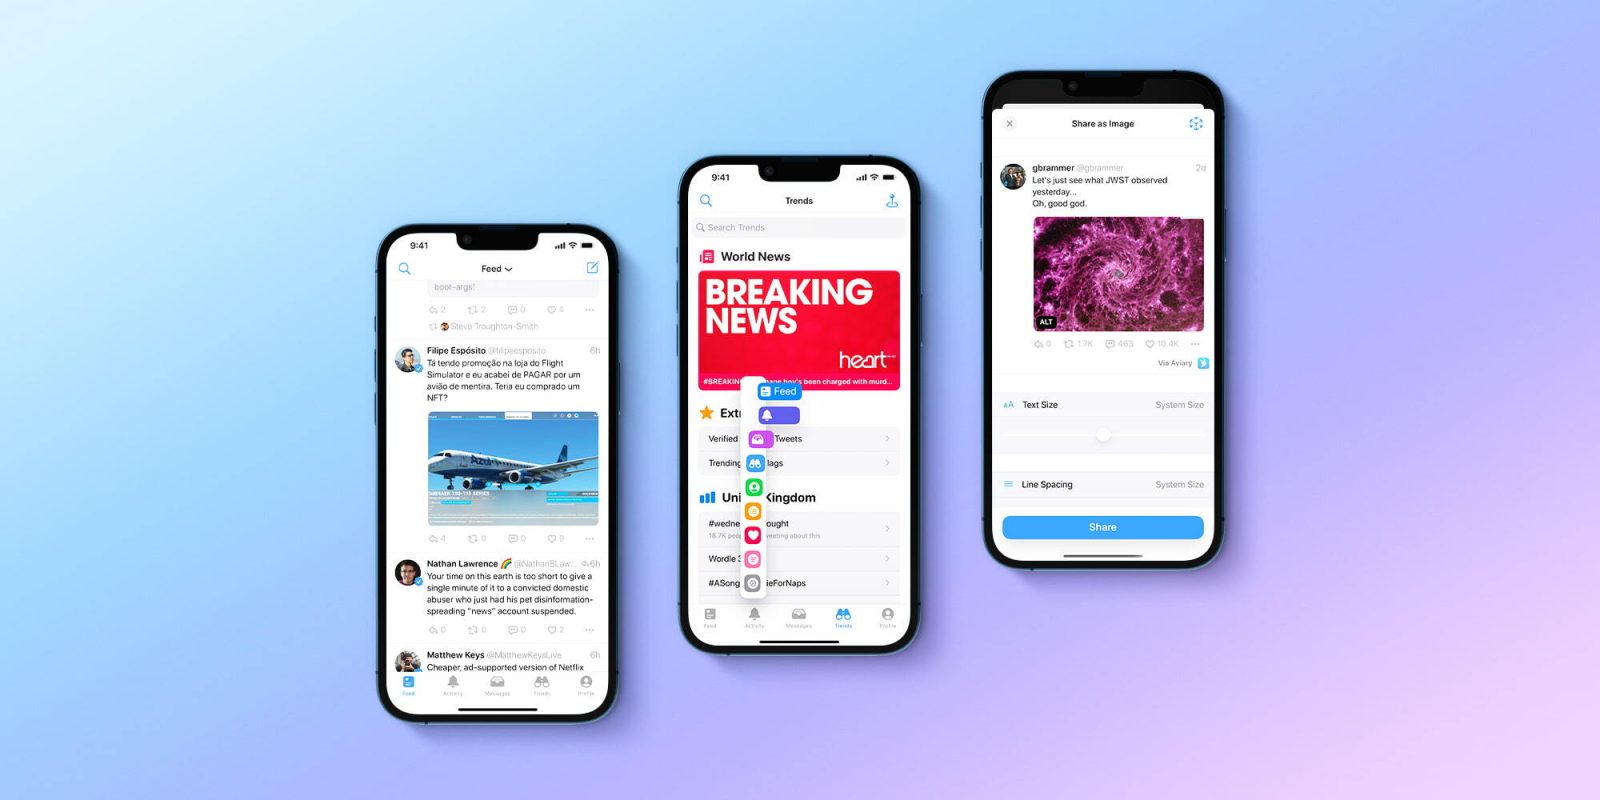 Twitter client for iOS 'Aviary' gets completely rebuilt with new features